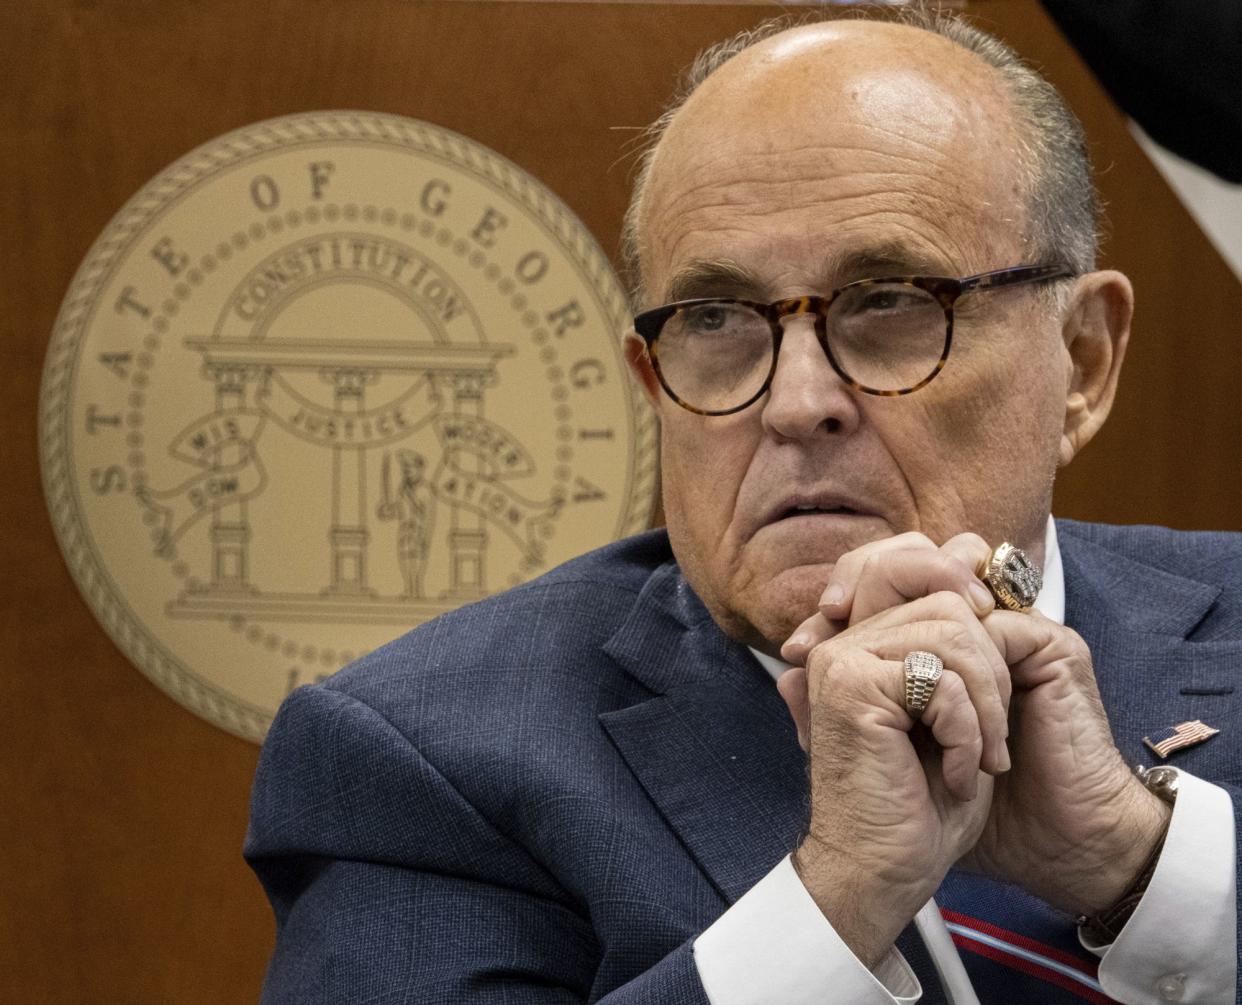 Rudy Giuliani listens to testimony during a subcommittee of the state Senate judiciary committee meeting at the State Capitol in Atlanta on Thursday, Dec. 3, 2020. 